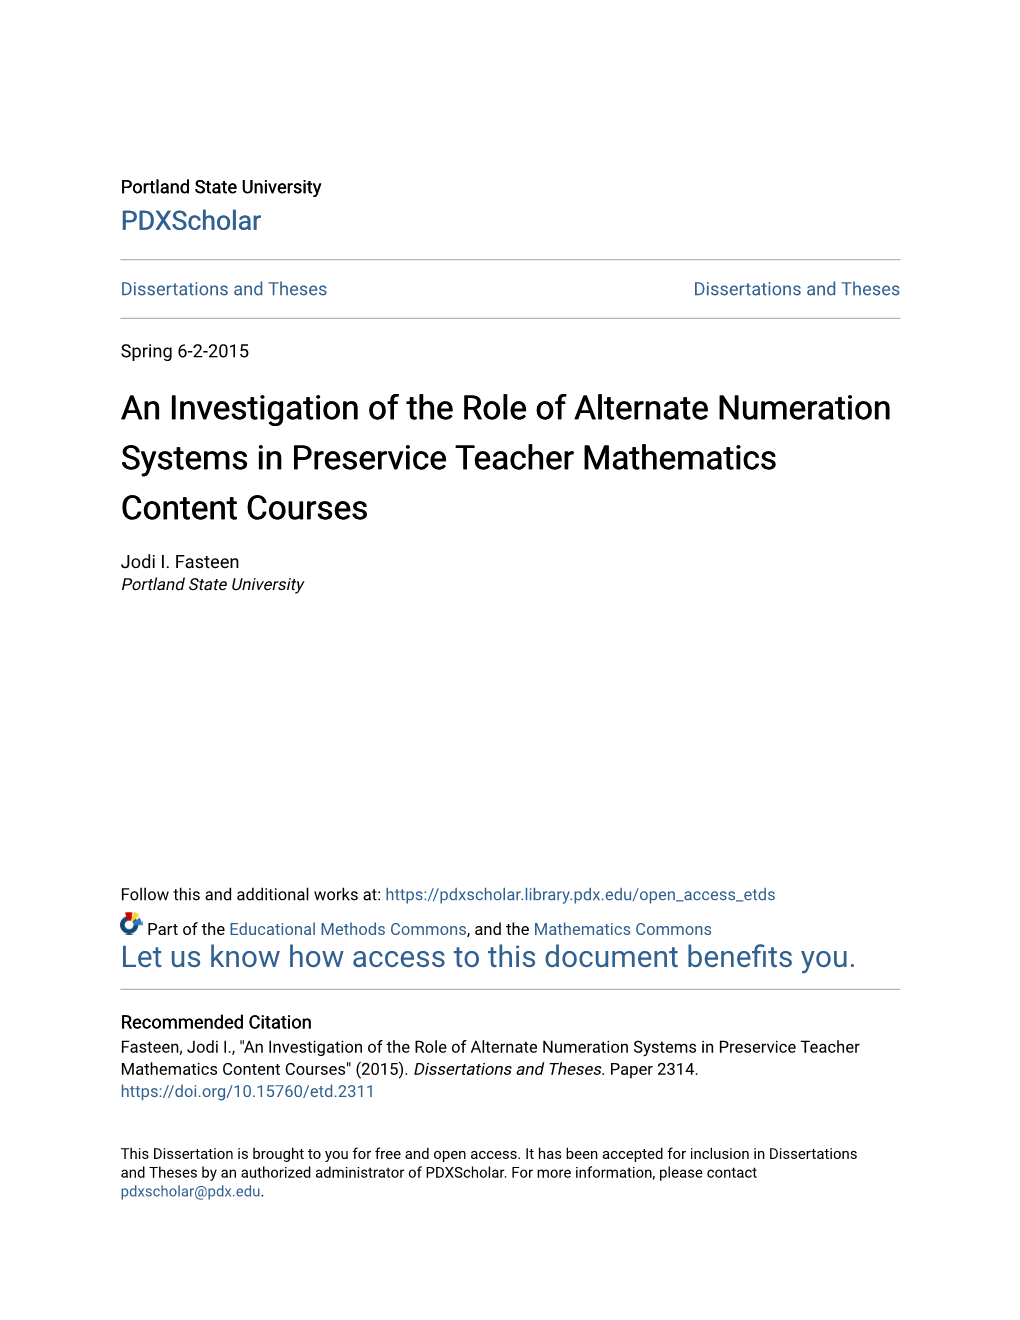 An Investigation of the Role of Alternate Numeration Systems in Preservice Teacher Mathematics Content Courses